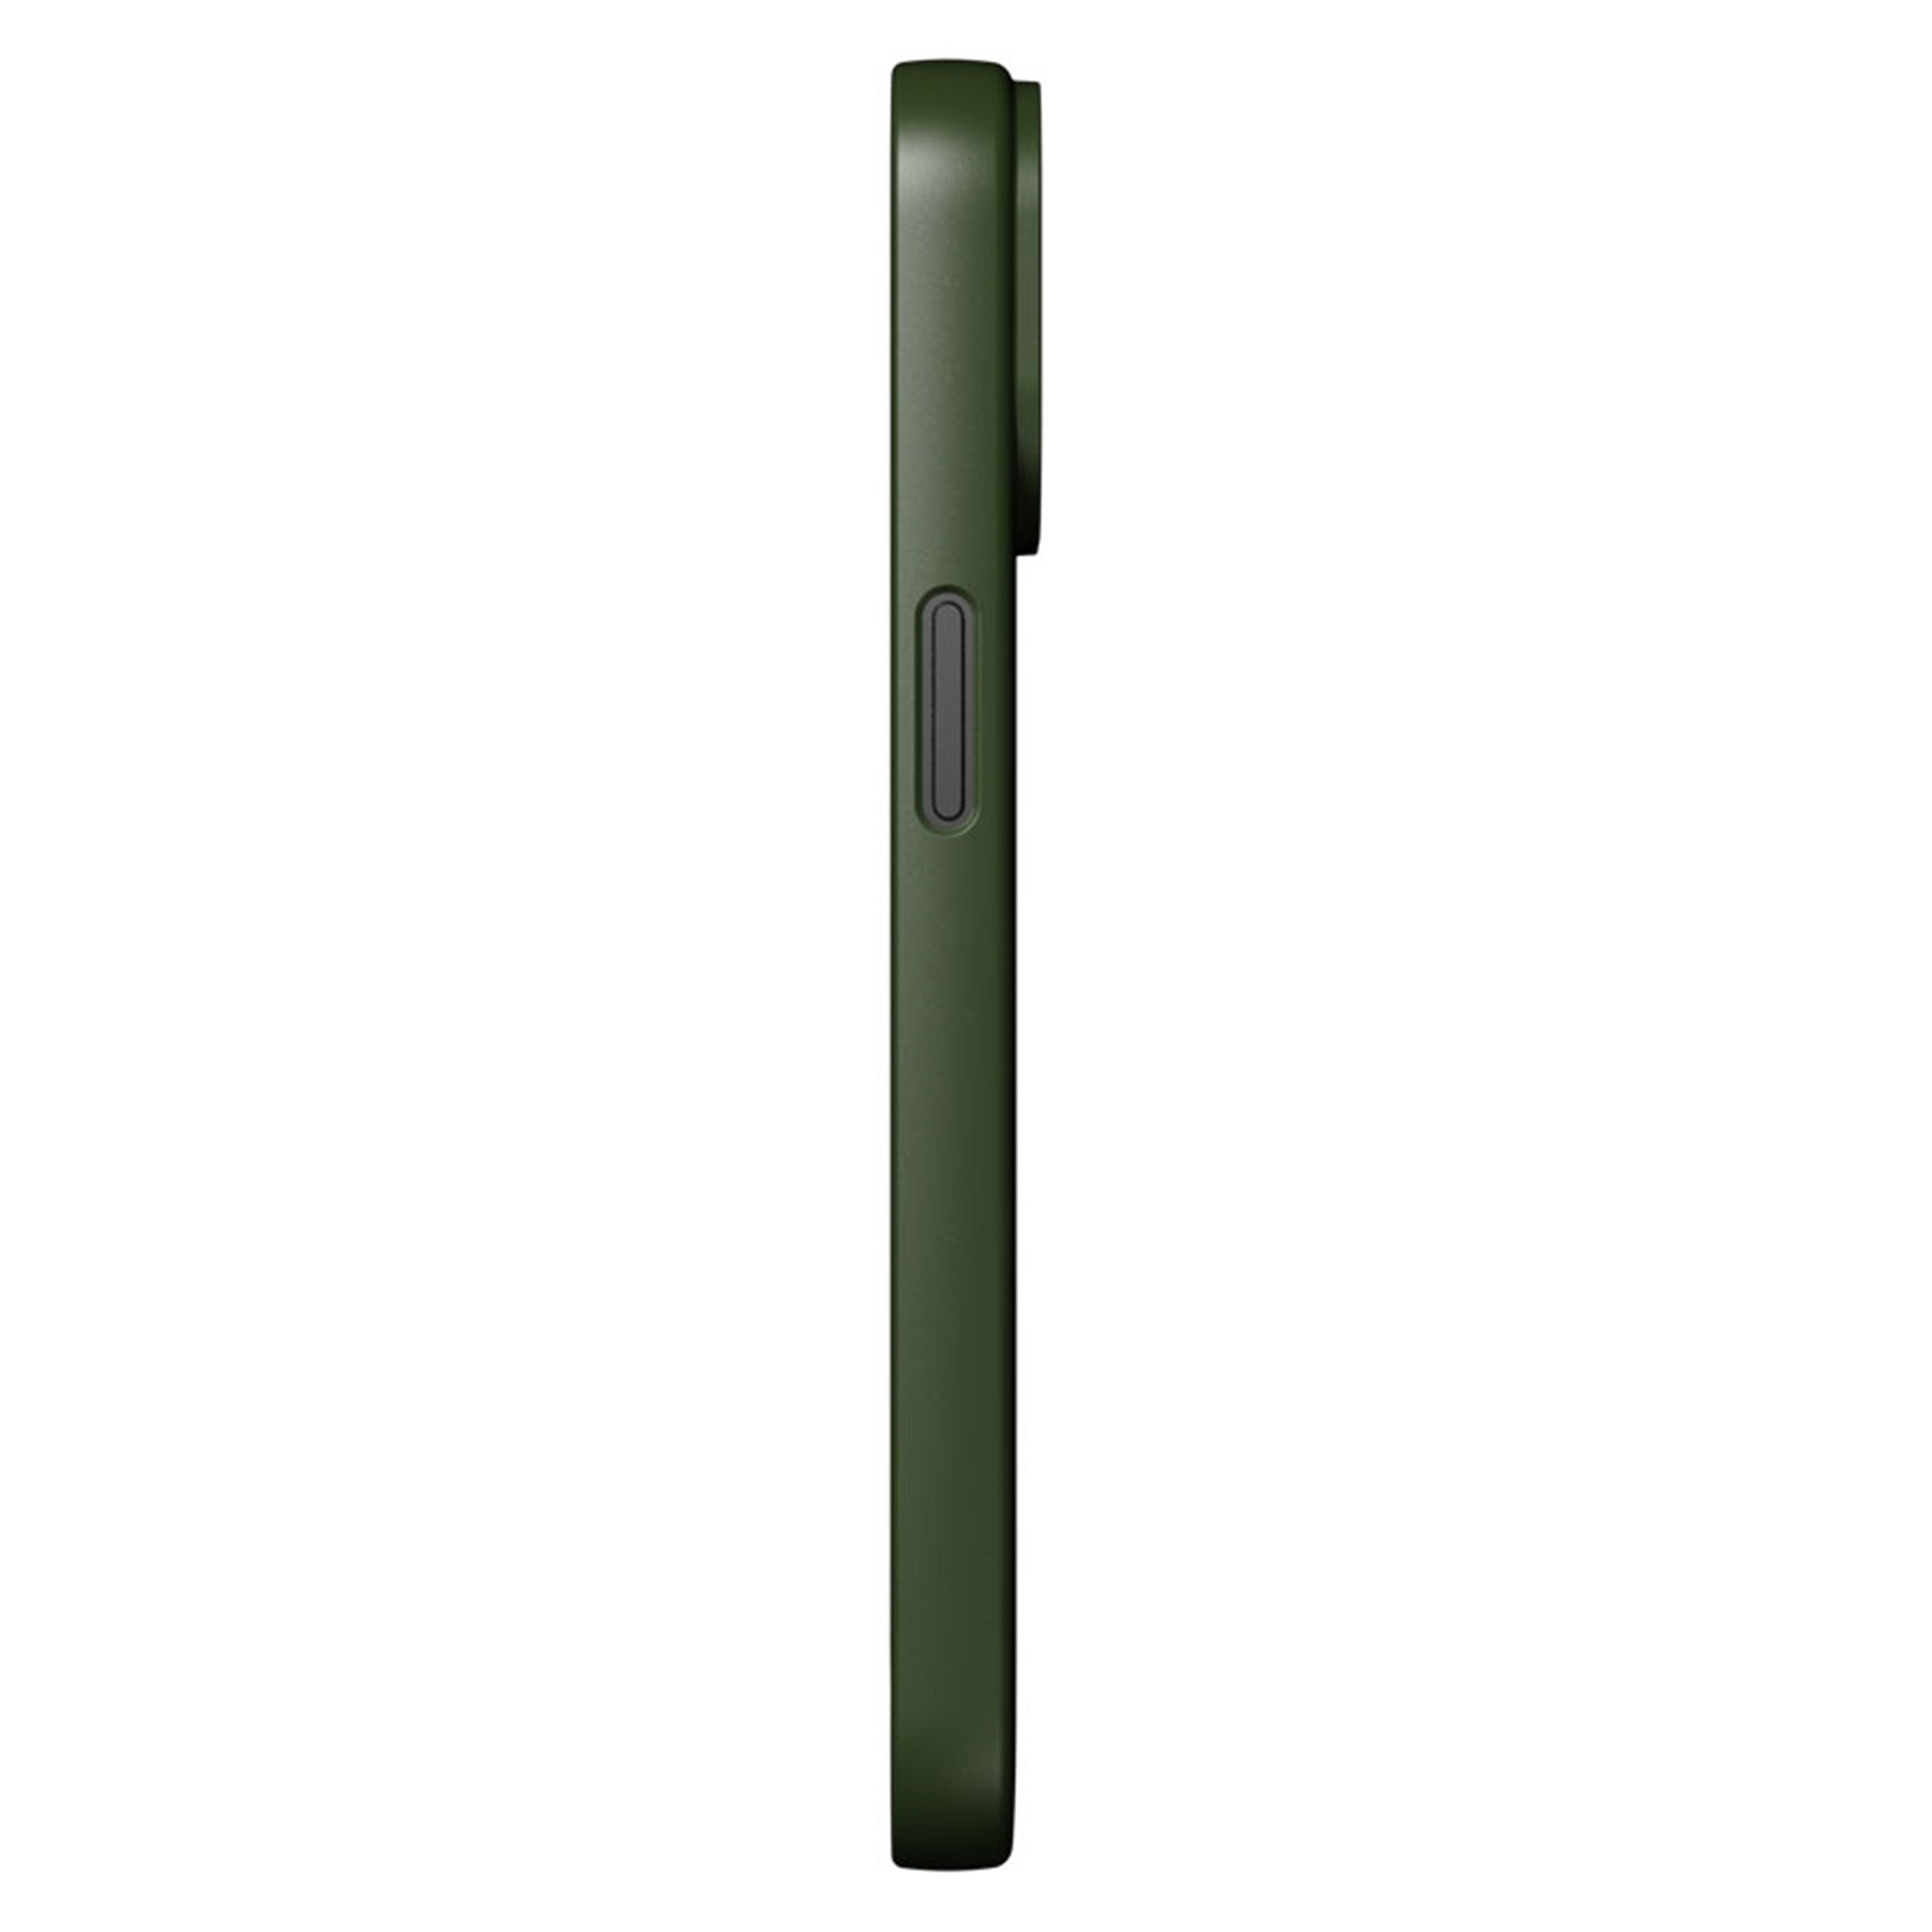 00 000 0090 0002 Nudient Thin Iphone 15 Magsafe Mobilcover, Pine Green 3